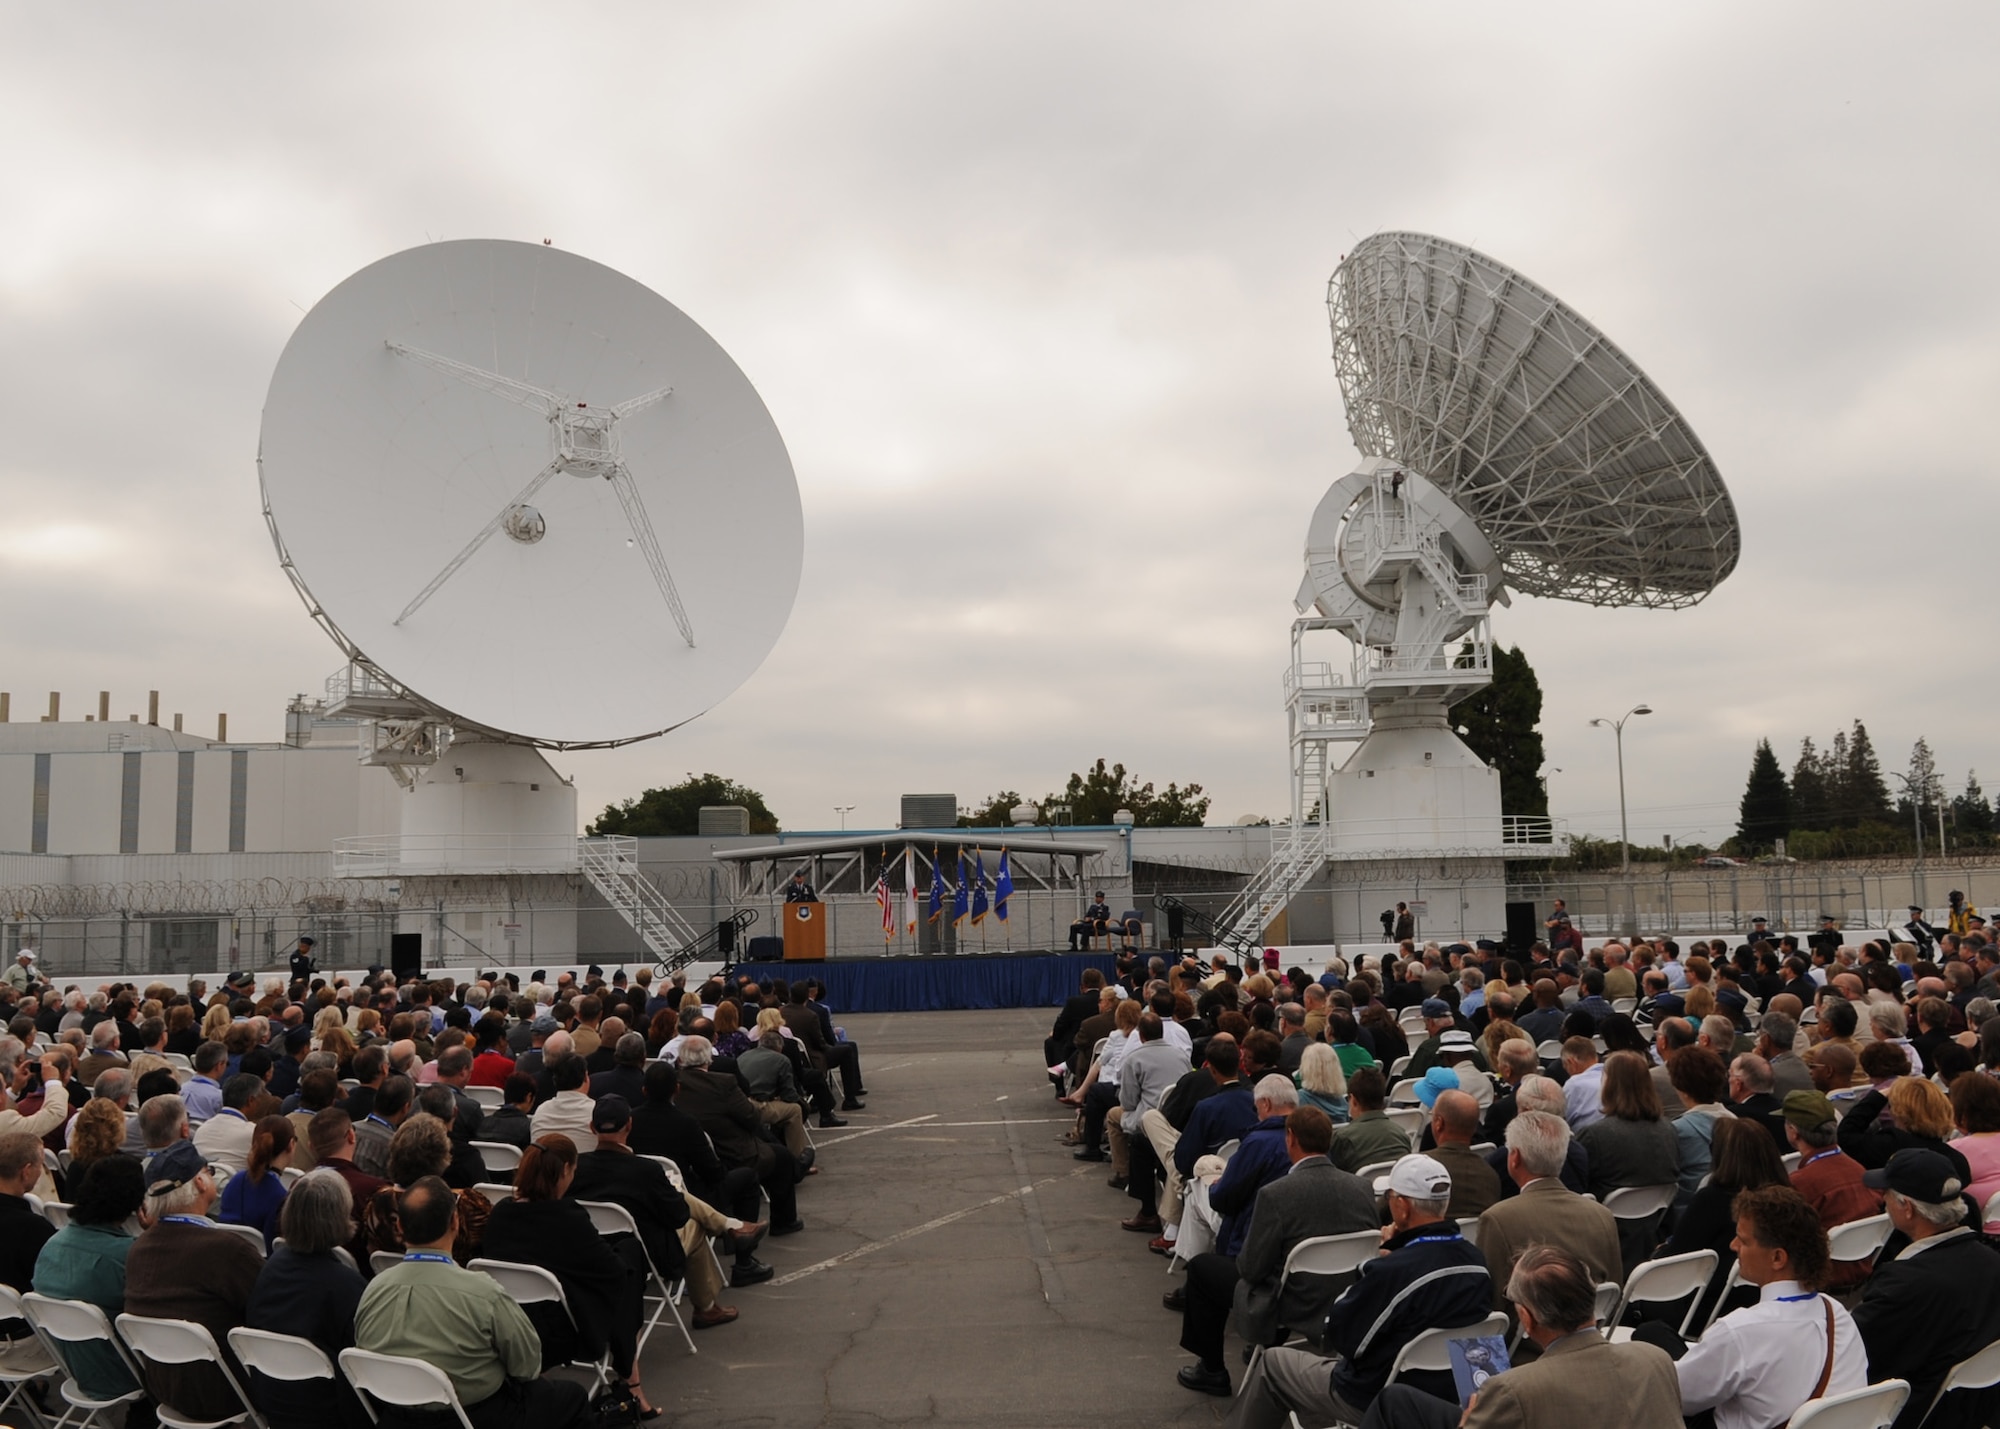 SUNNYVALE, Calif.-- Col. Wayne Monteith, the 50th Space Wing commander, delivers a speech during the closure ceremony of Onizuka Air Force Station here, Wednesday, July 28, 2010. Built in 1960, Onizuka AFS was originally known as the Air Force Satellite Test Center. It was selected for closure by the Base Closure and Realignment Commission in 2005, with the recommendation to move operations to Vandenberg Air Force Base, in order to consolidate satellite command and control operations while reducing excess infrastructure. (U.S. Air Force Photo/Senior Airman Bryan Boyette)